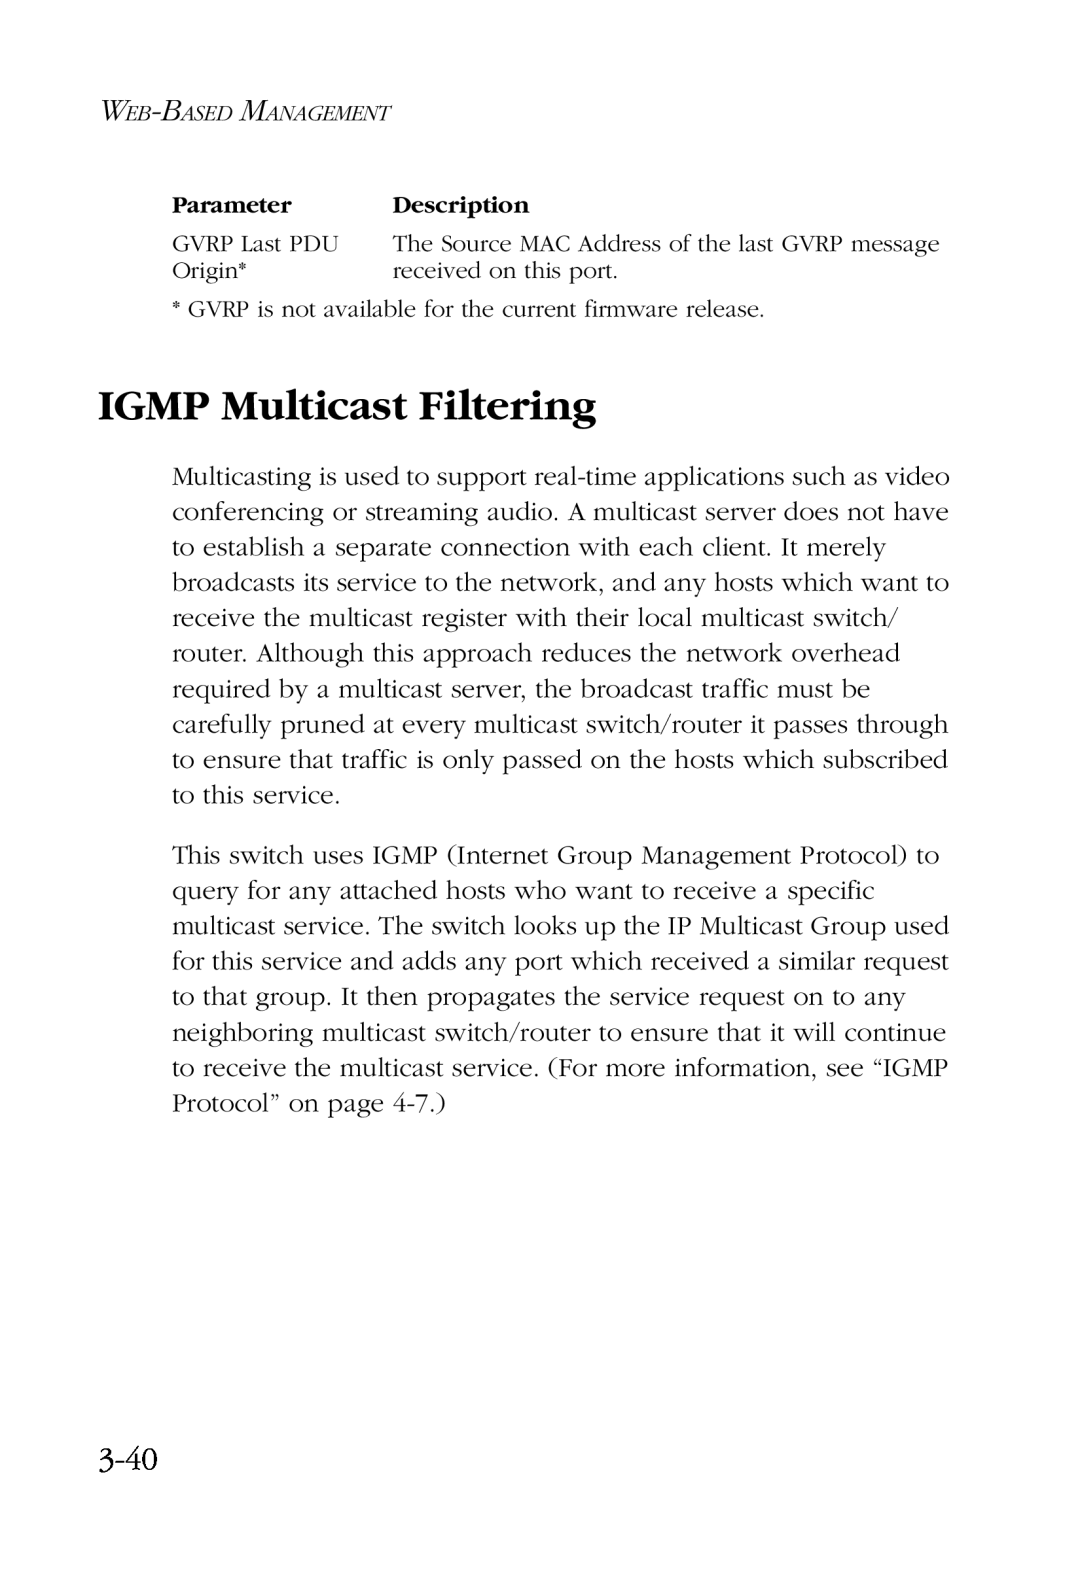 SMC Networks SMC6924VF manual IGMP Multicast Filtering, 3-40, GVRP is not available for the current firmware release 